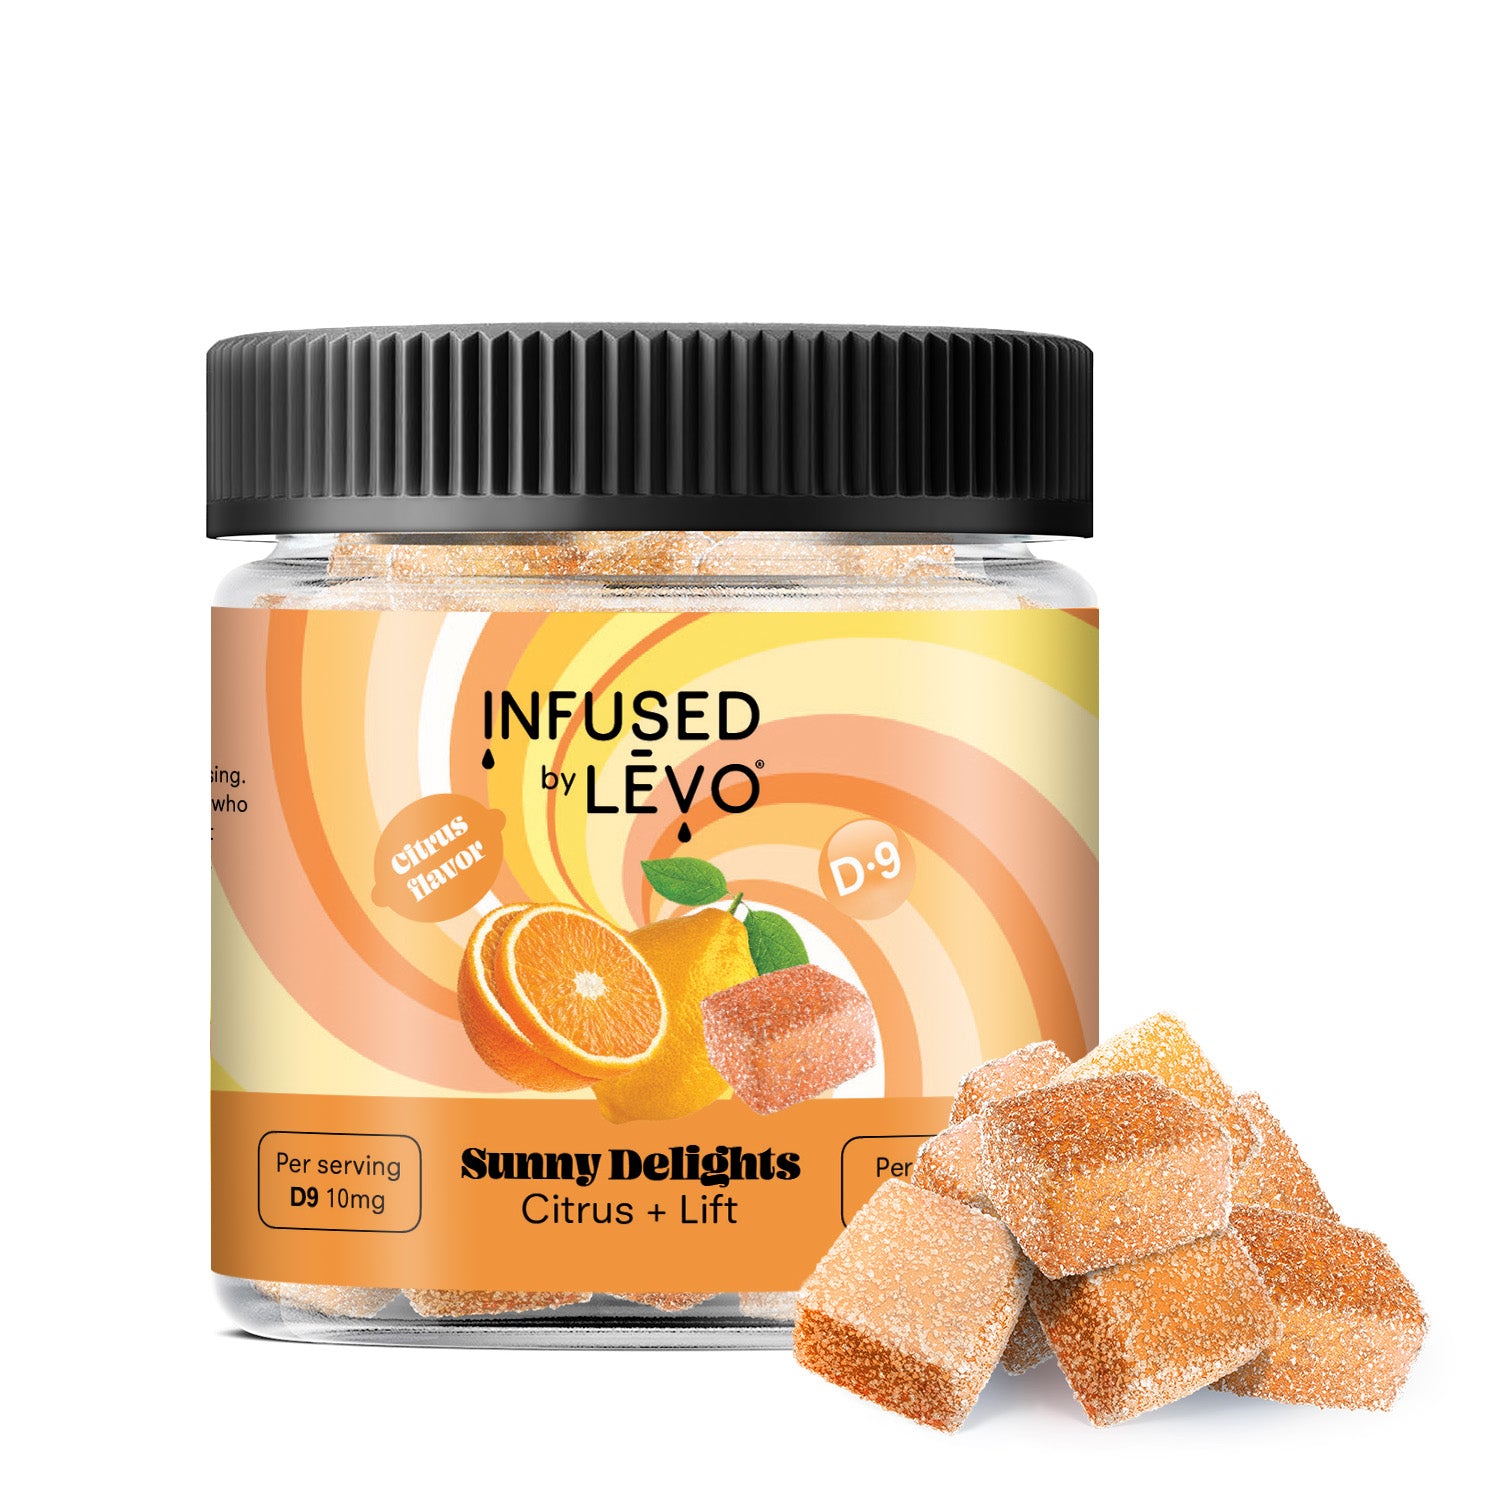 Infused by LEVO Sunny Delights Gummies with D-9. Closed bottle with group of gummies.